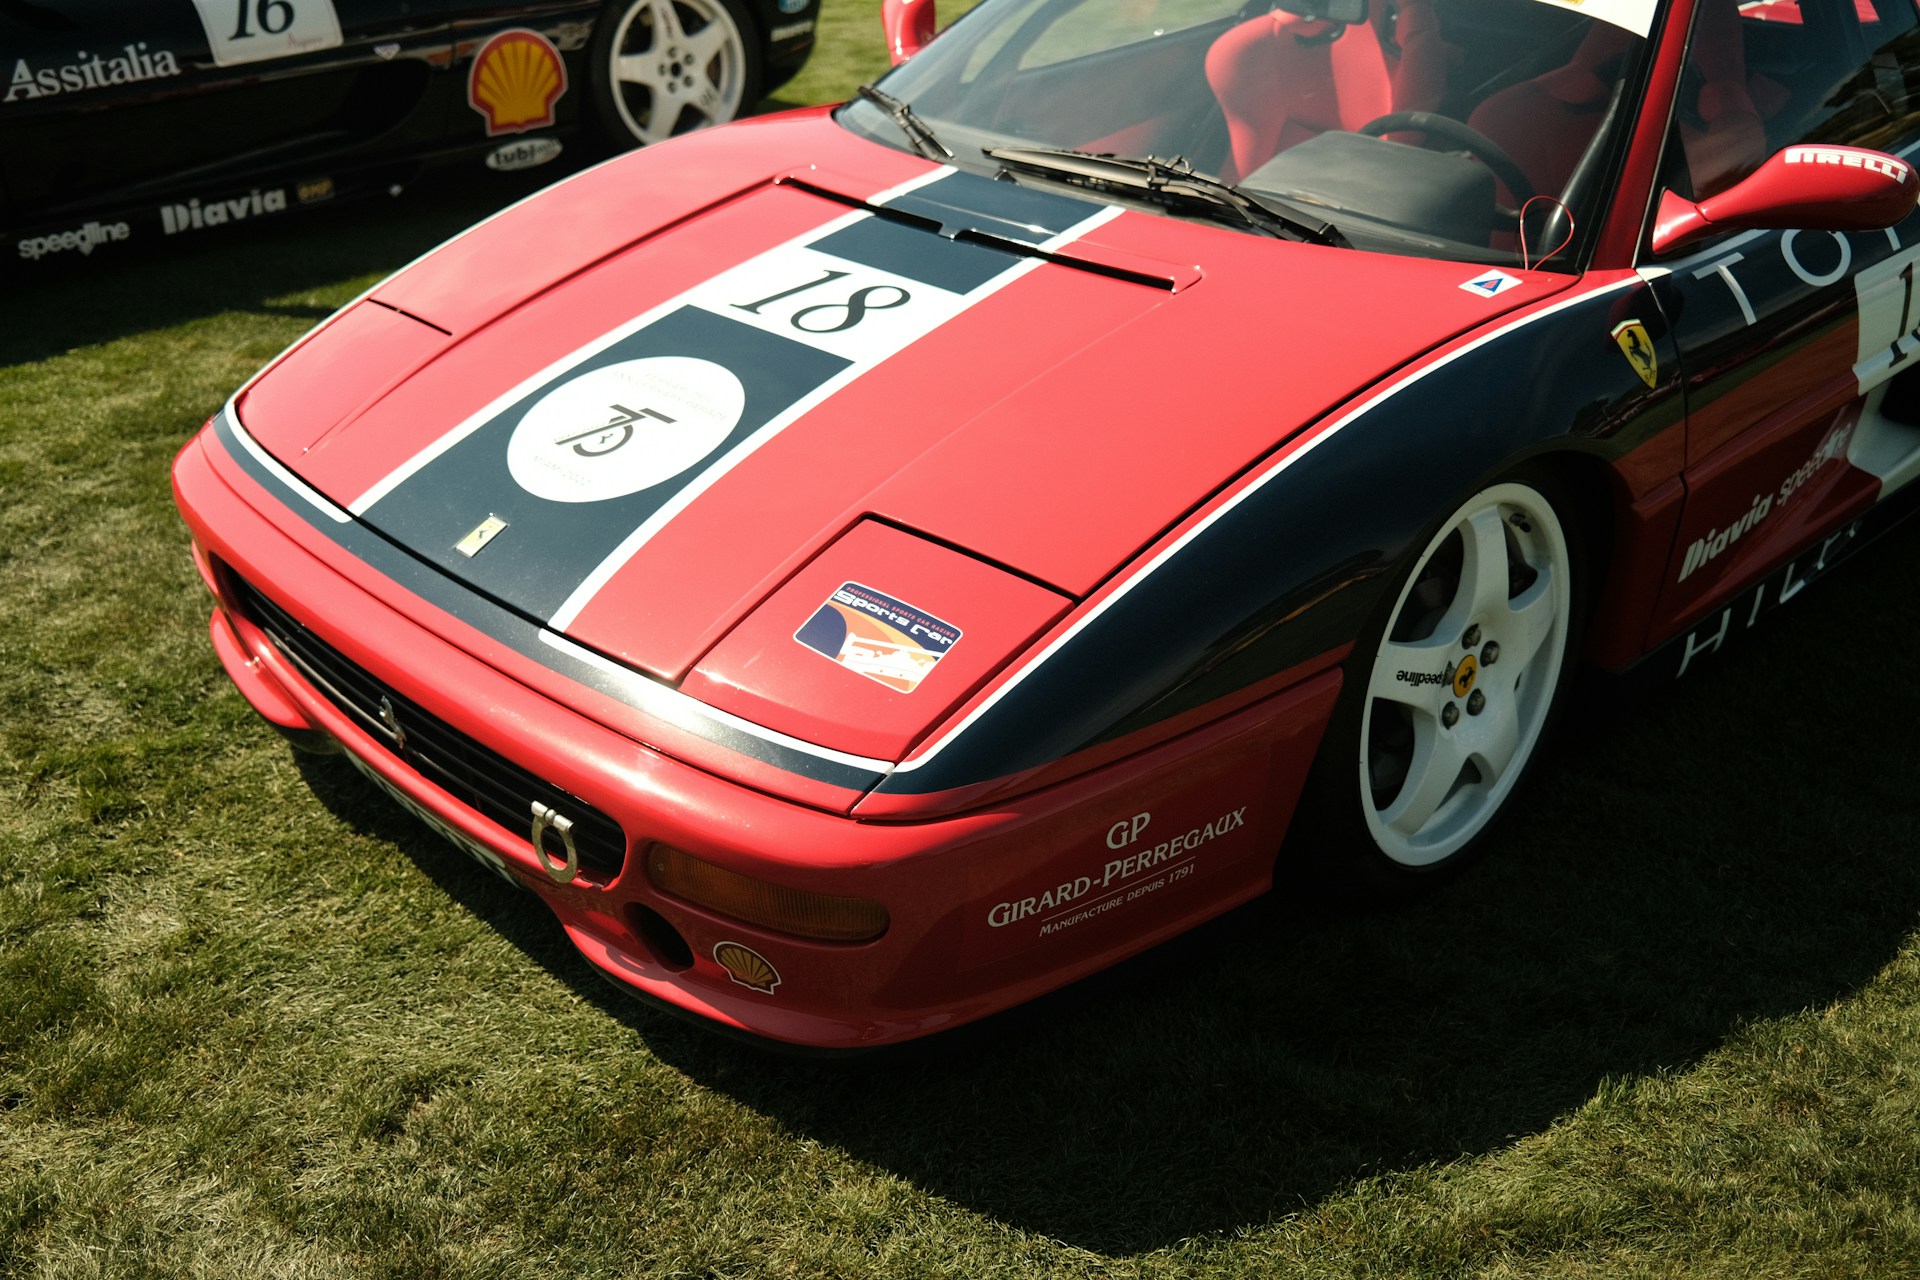 A red Ferrari at Pebble Beach Concours d'Elegance in California, one of the top international car shows. (photo: Patrick Konior)